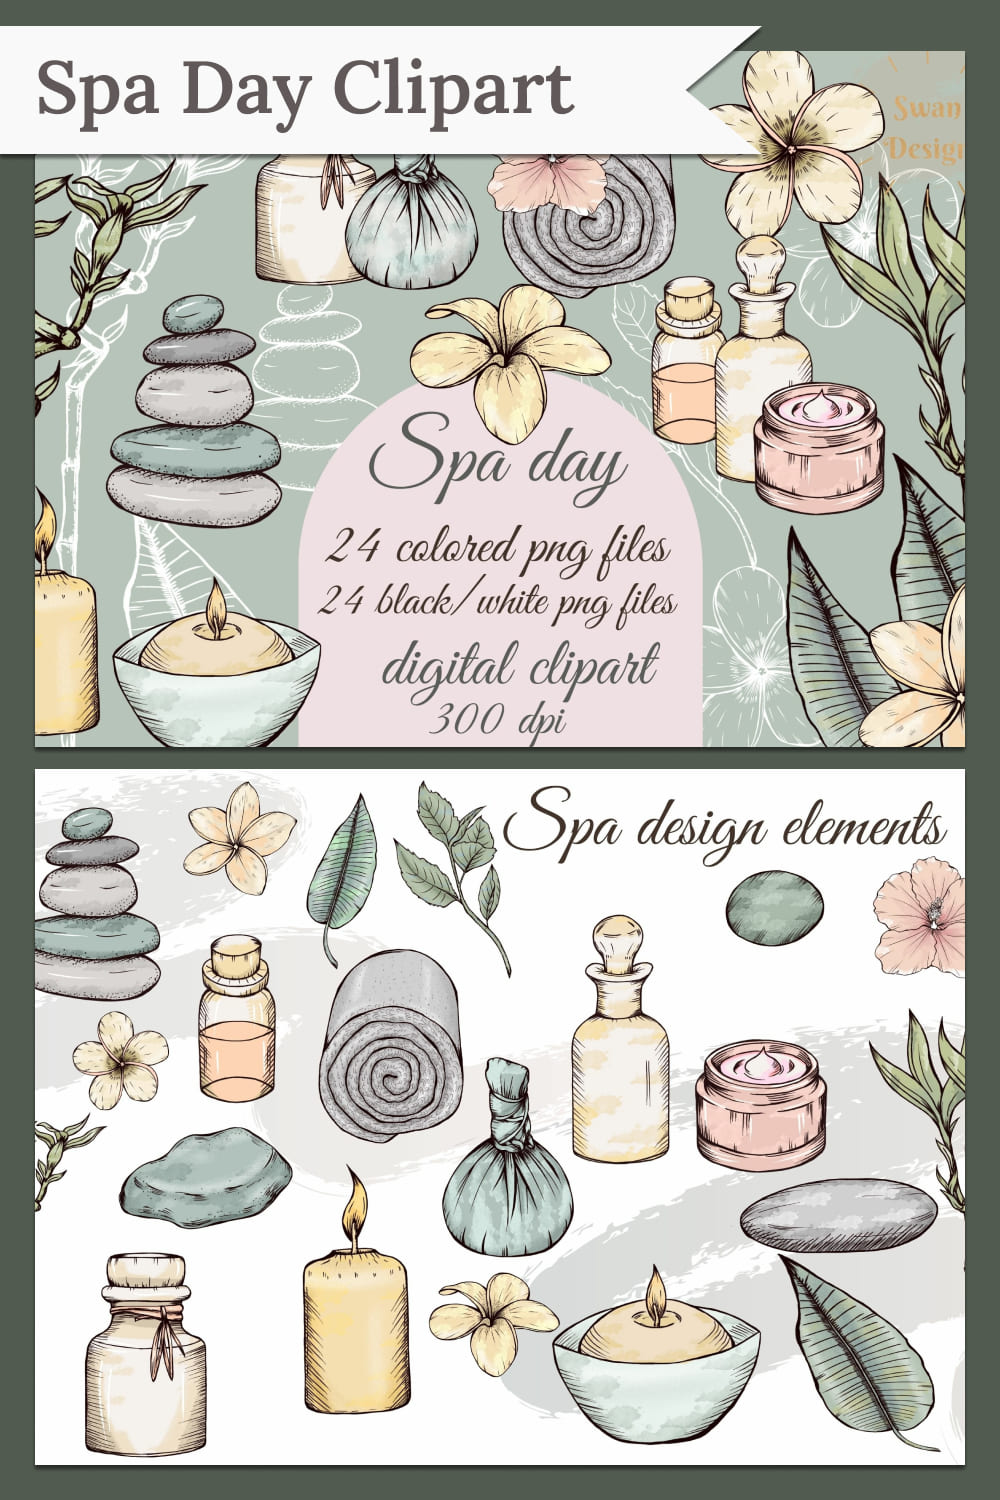 Spa day clipart - pinterest image preview.